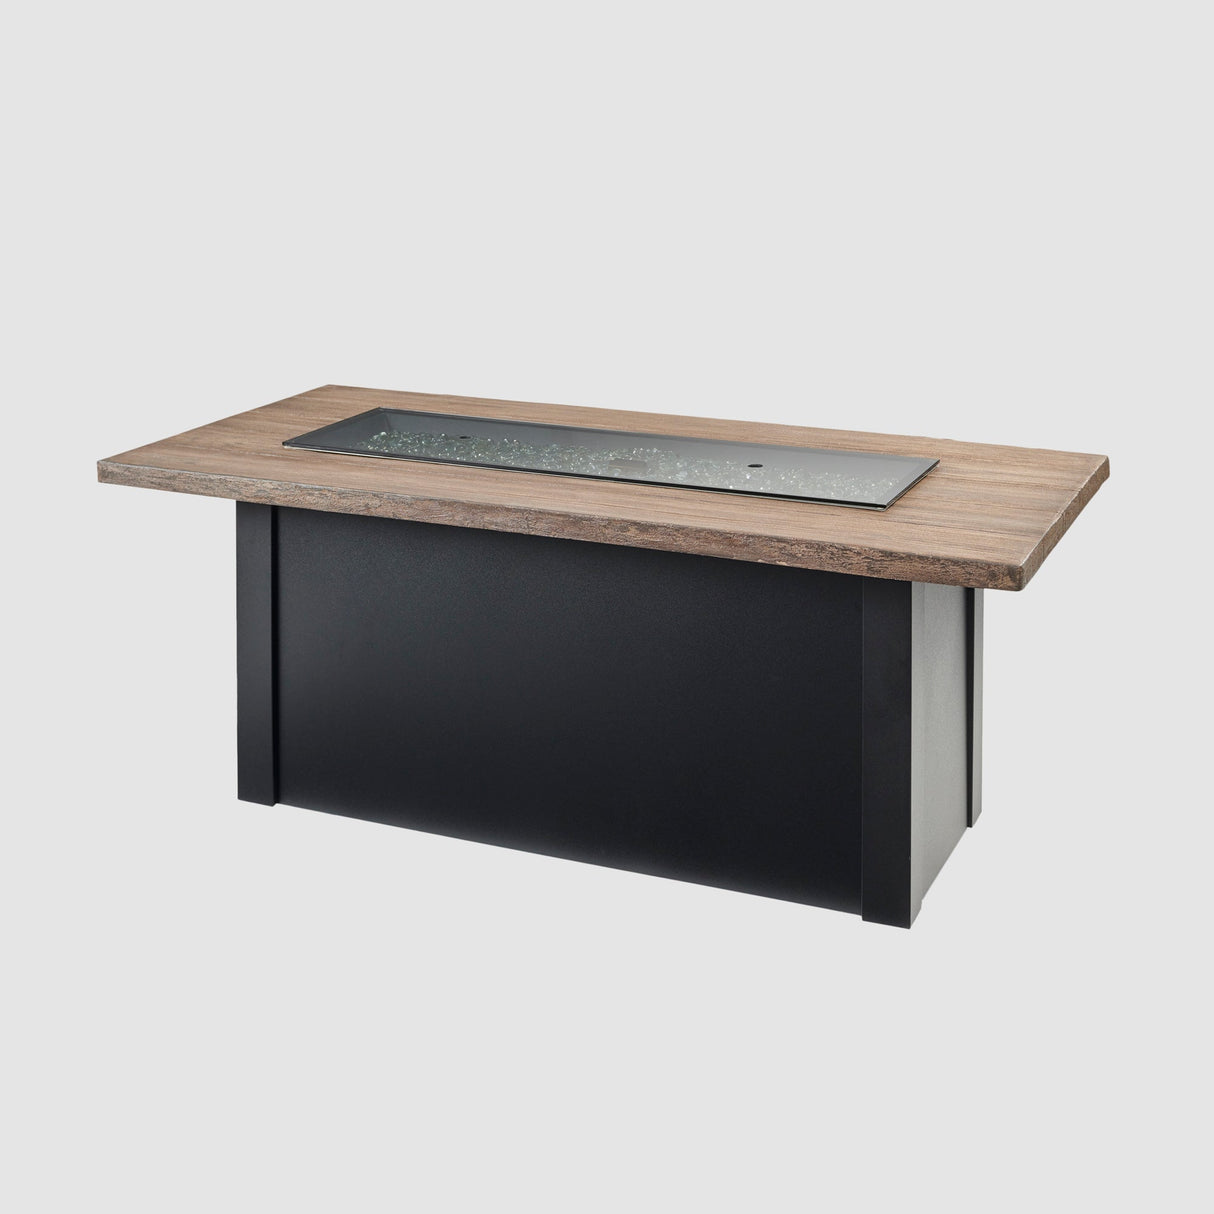 A cover placed on the top of a Havenwood Linear Gas Fire Pit Table with a Driftwood top and Luverne Black base on a grey background